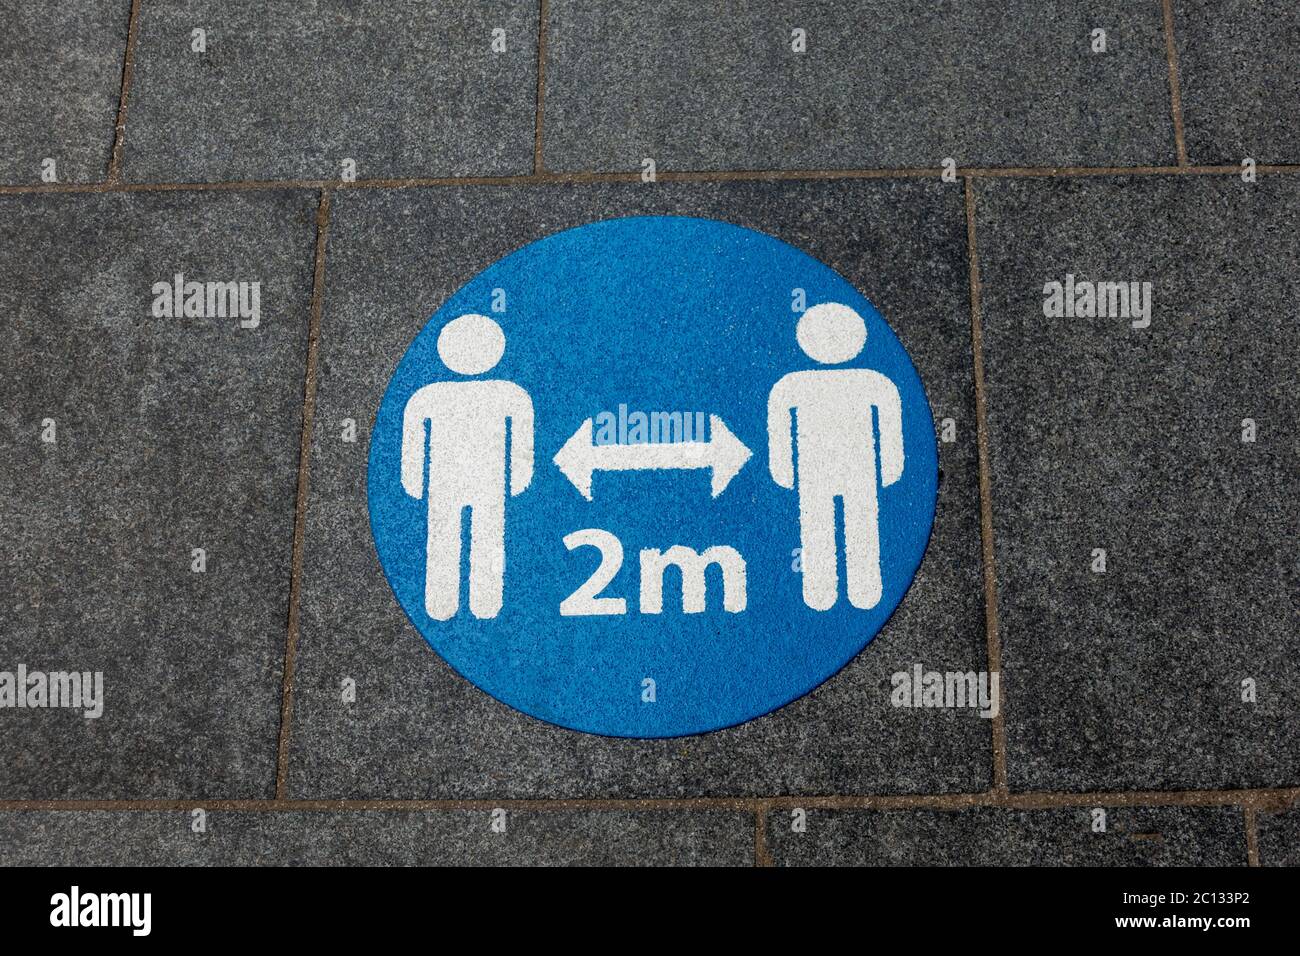 2 meters illustration on a sidewalk in the UK Stock Photo